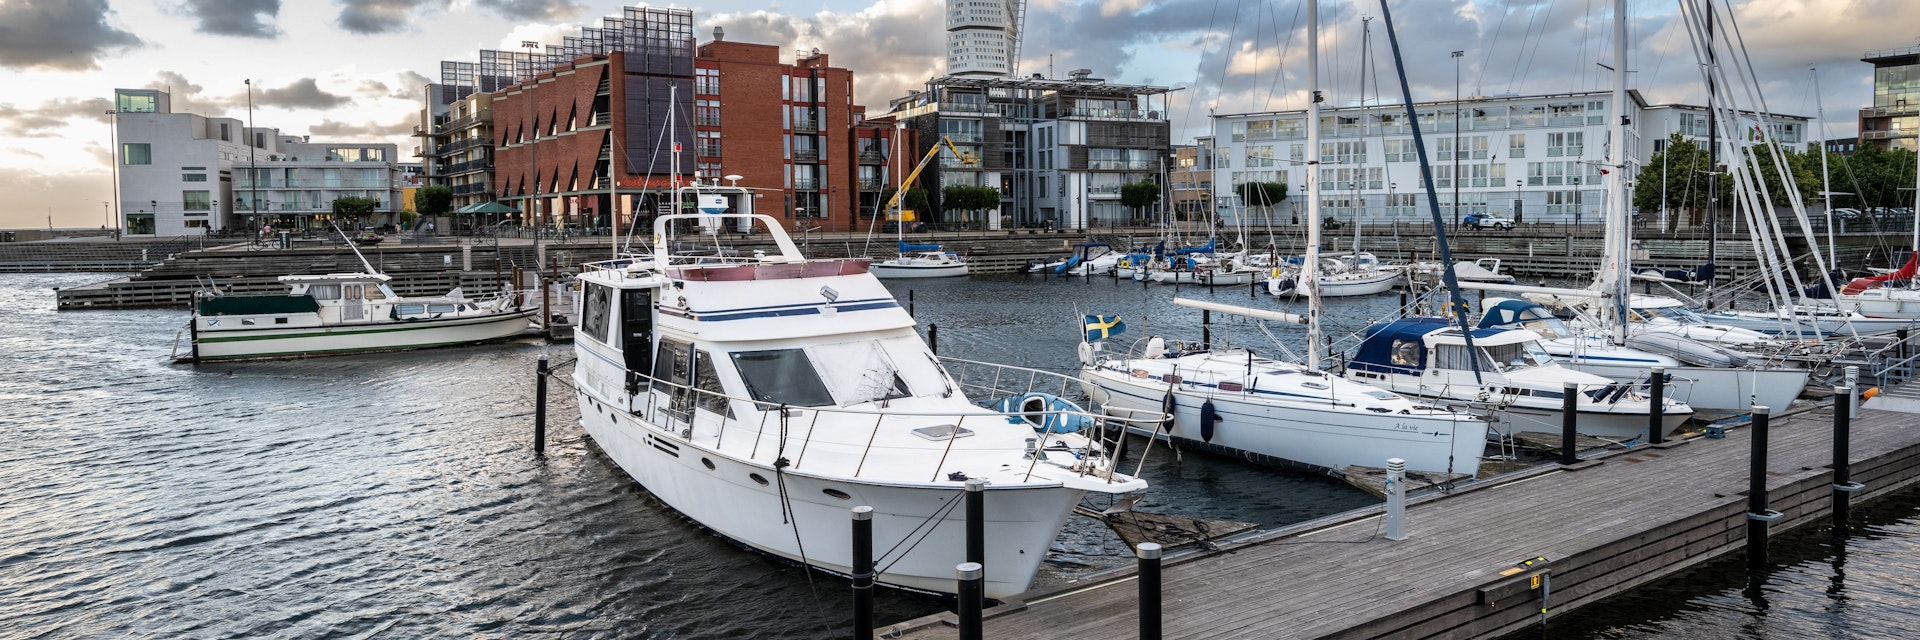 Marina at Västra Hamnen with Turning Torso in the background.